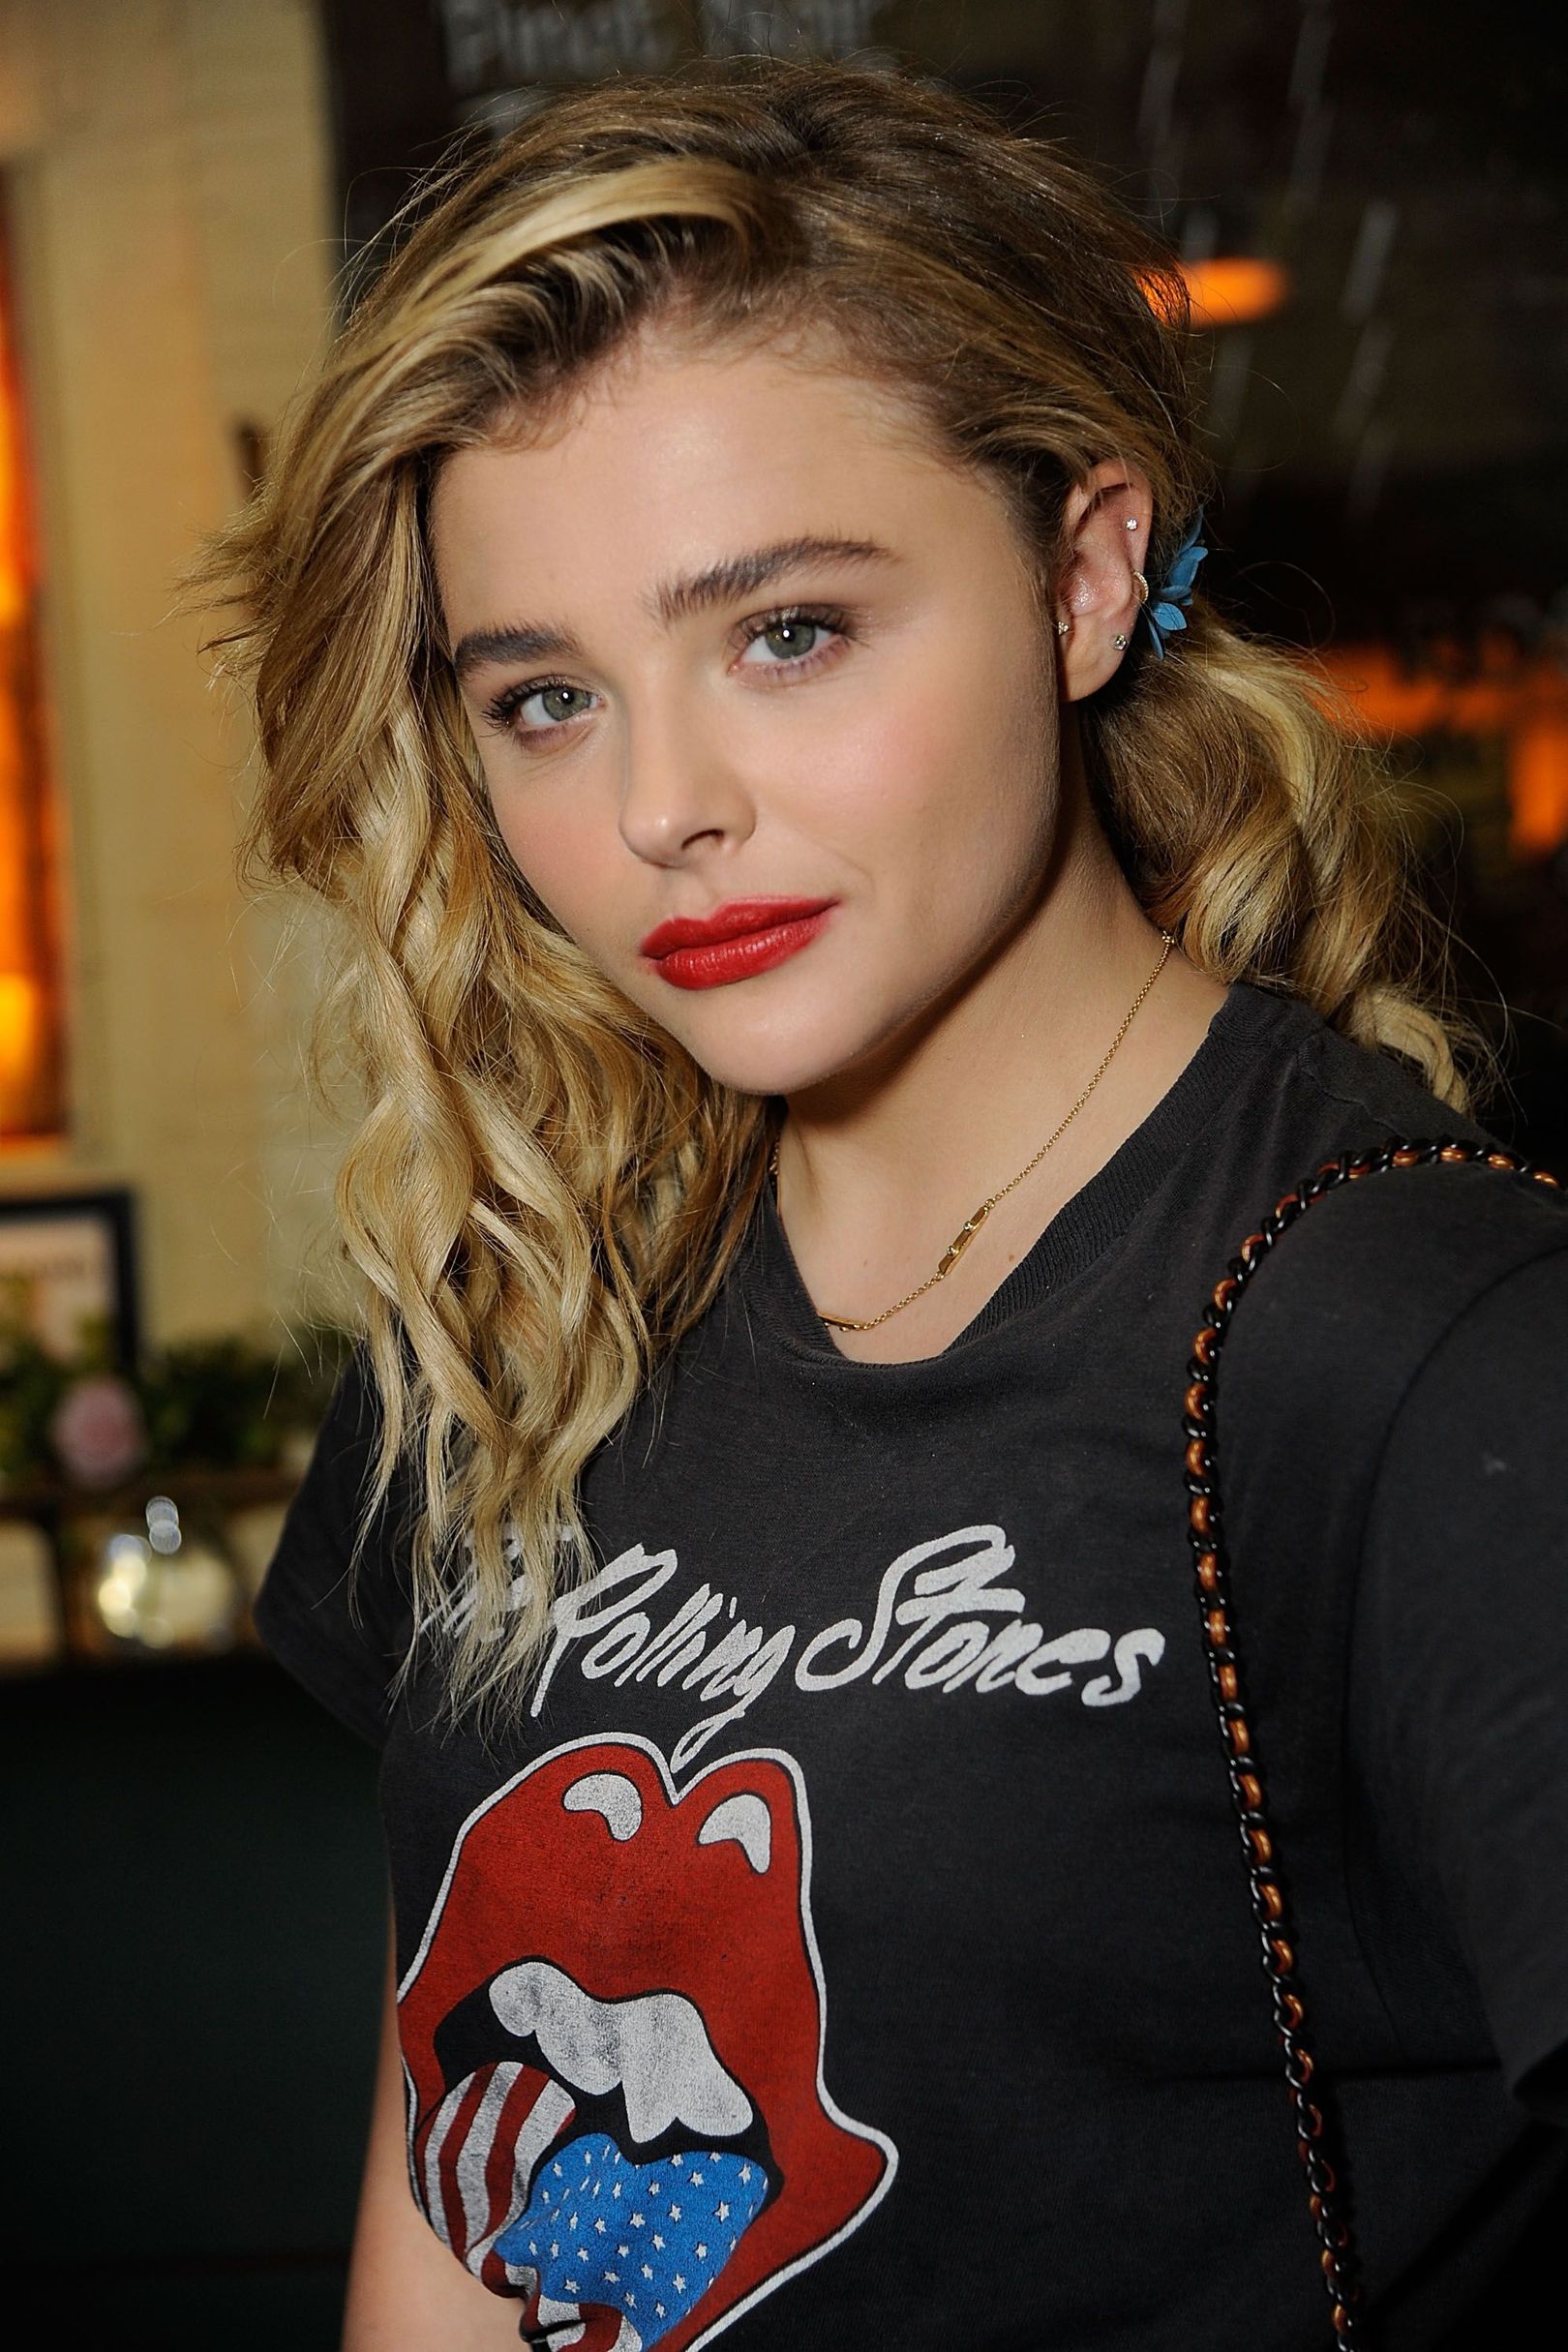 Chloe Moretz at the Coach party at NYFW.